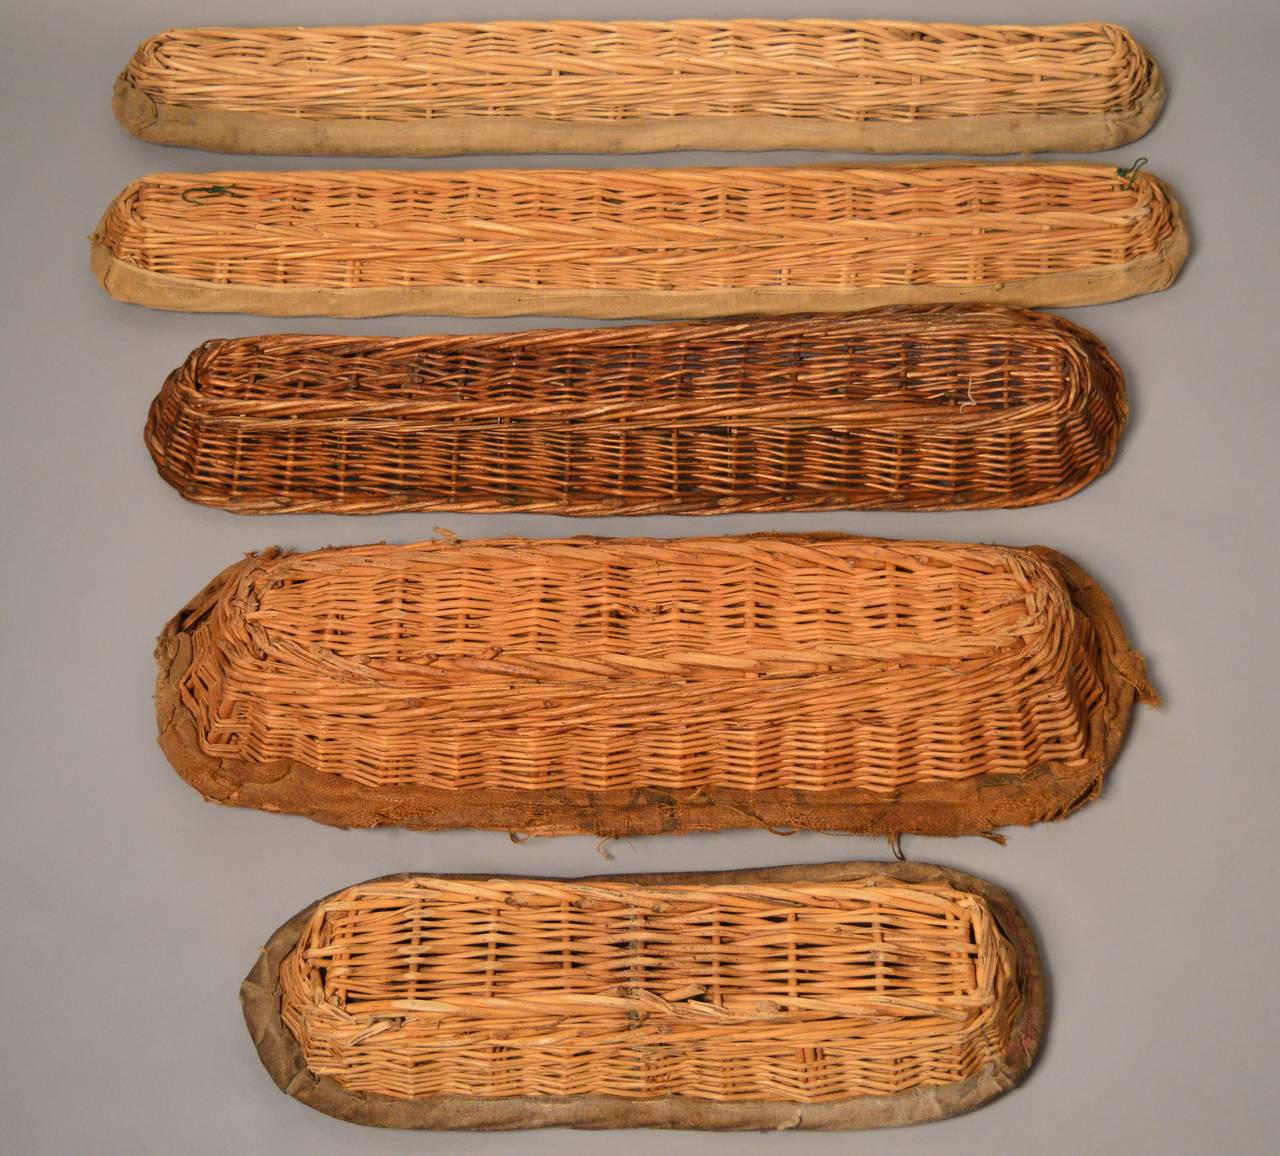 A collection of 5 French bakers baskets circa 1920. Four of the baskets are lined with the original linen. The collection makes a graphic and unusual composition to hang on a wall.
longest=33